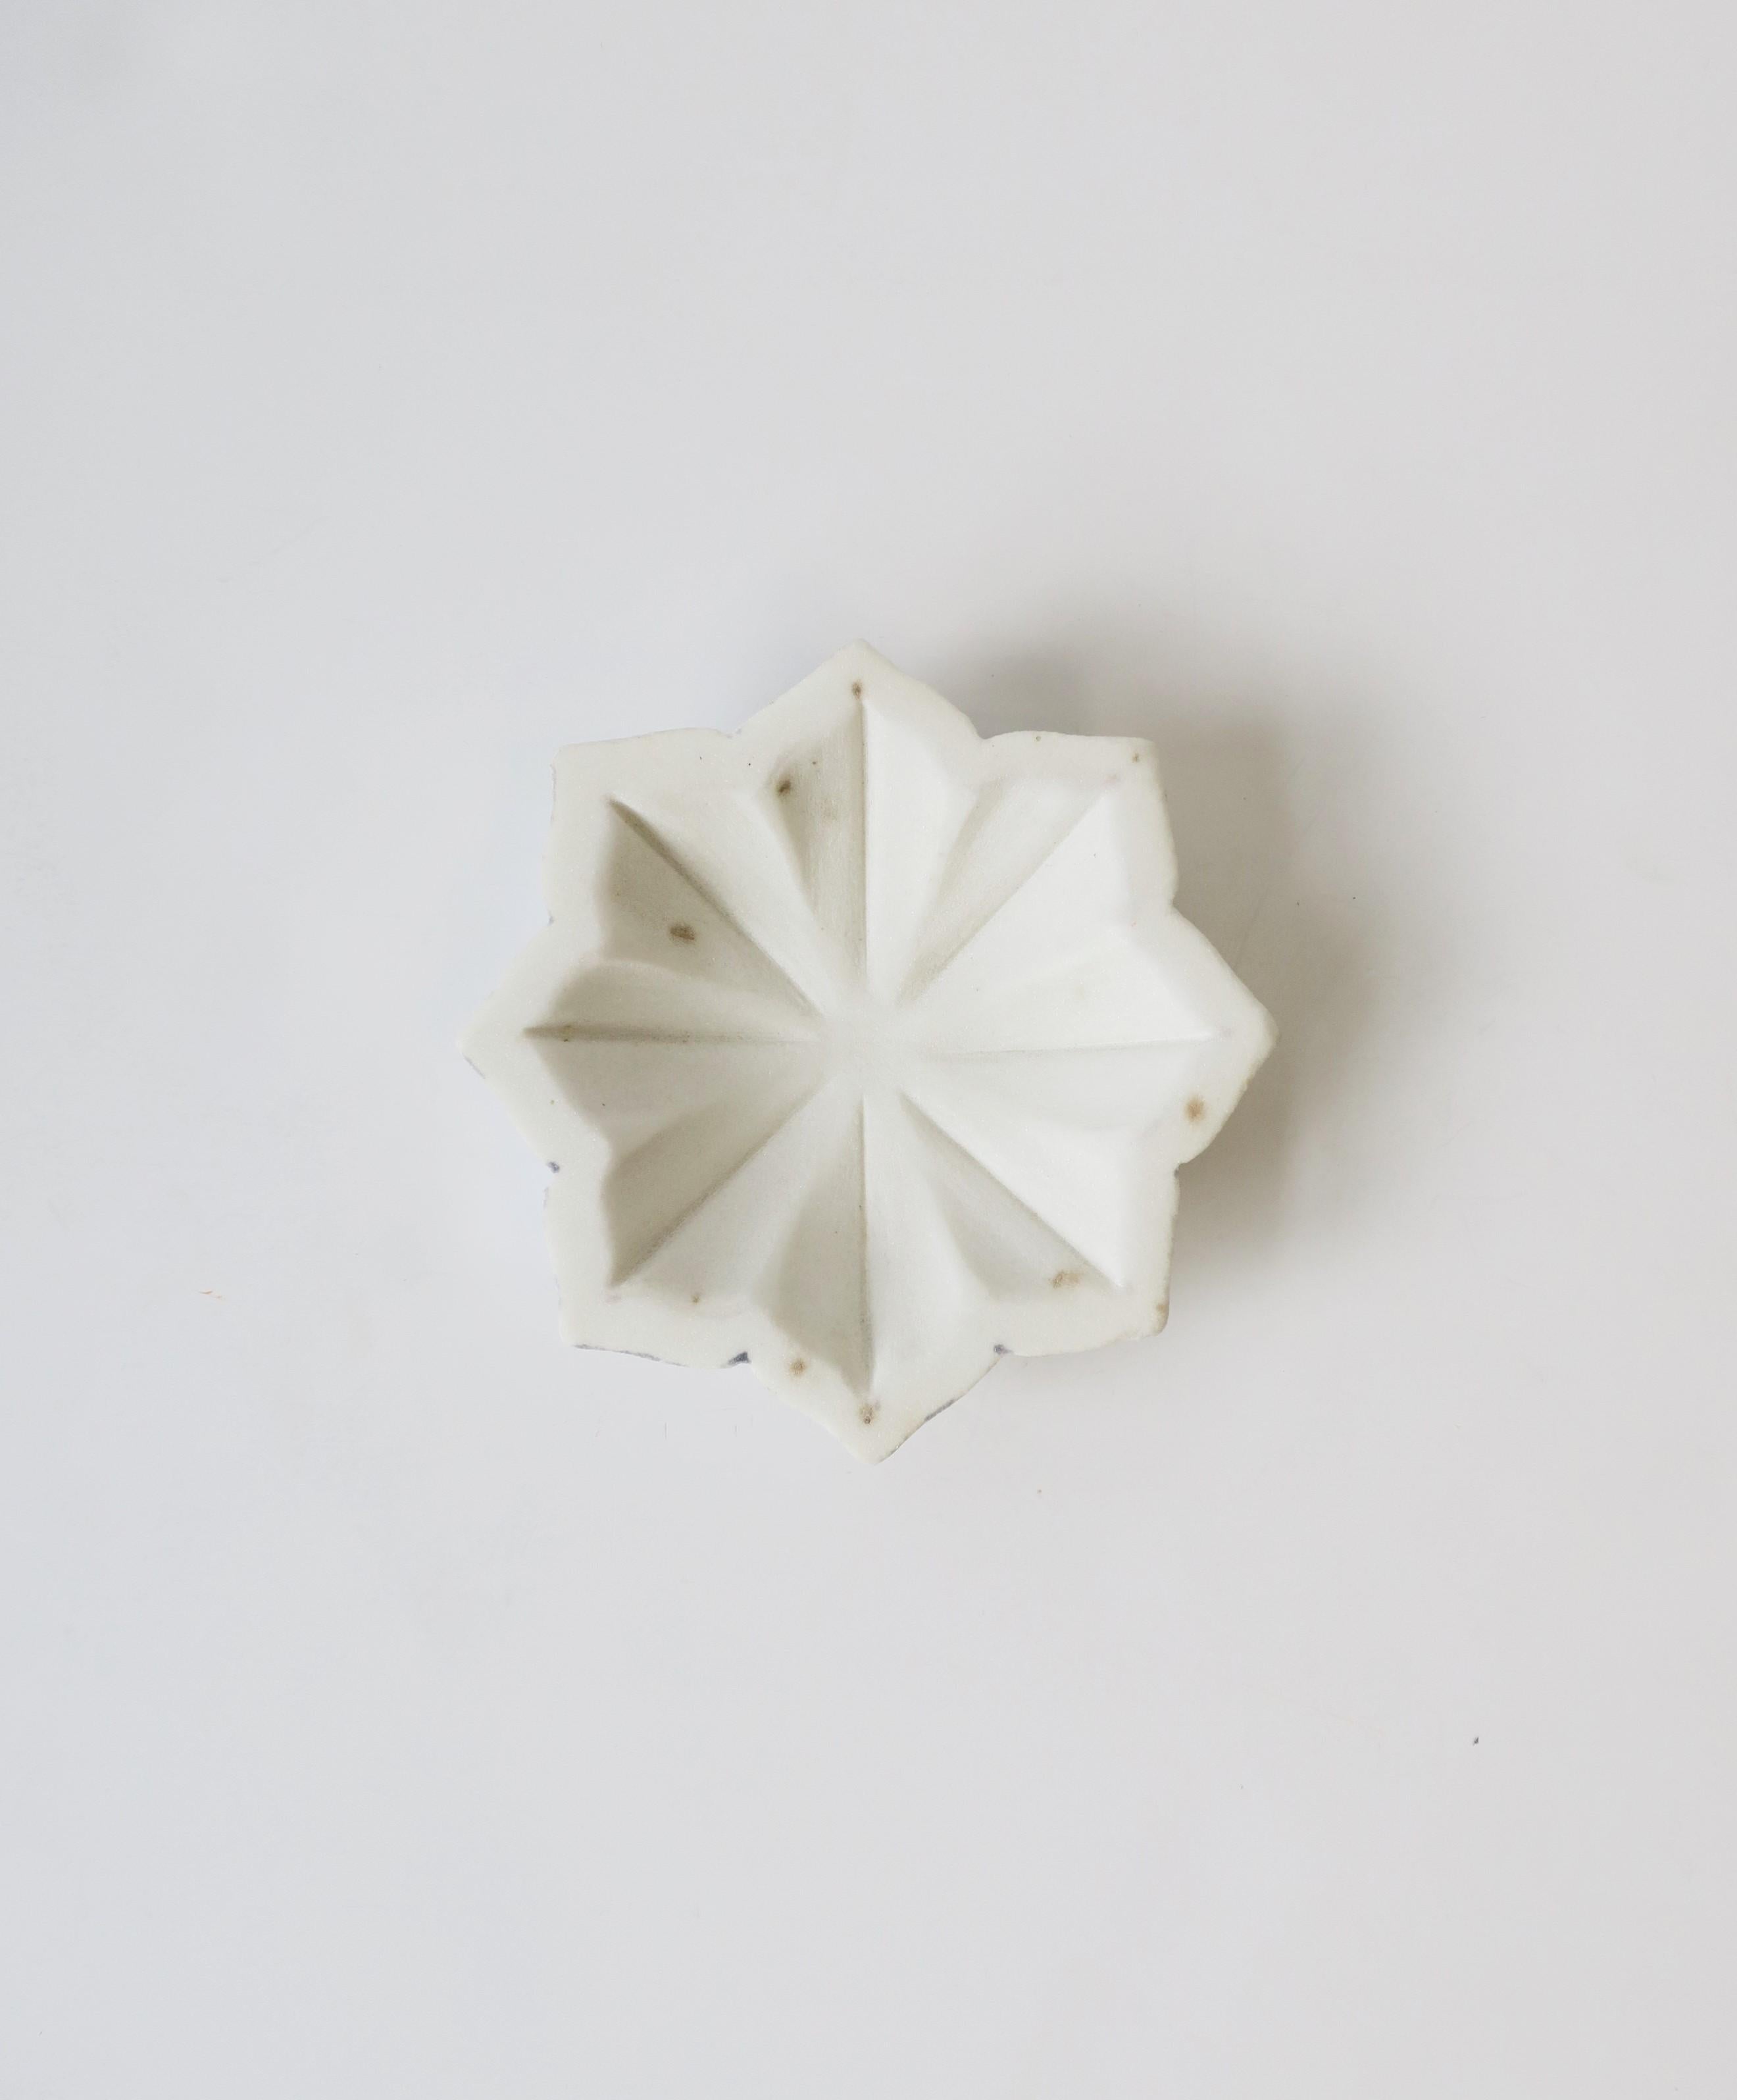 A beautiful white marble star-flower hand carved dish from a single piece of white marble. A great accent piece, as a jewelry dish, or vide-poche (catch-all) for small items on a desk, vanity, bathroom, etc. Piece measures: 5.75